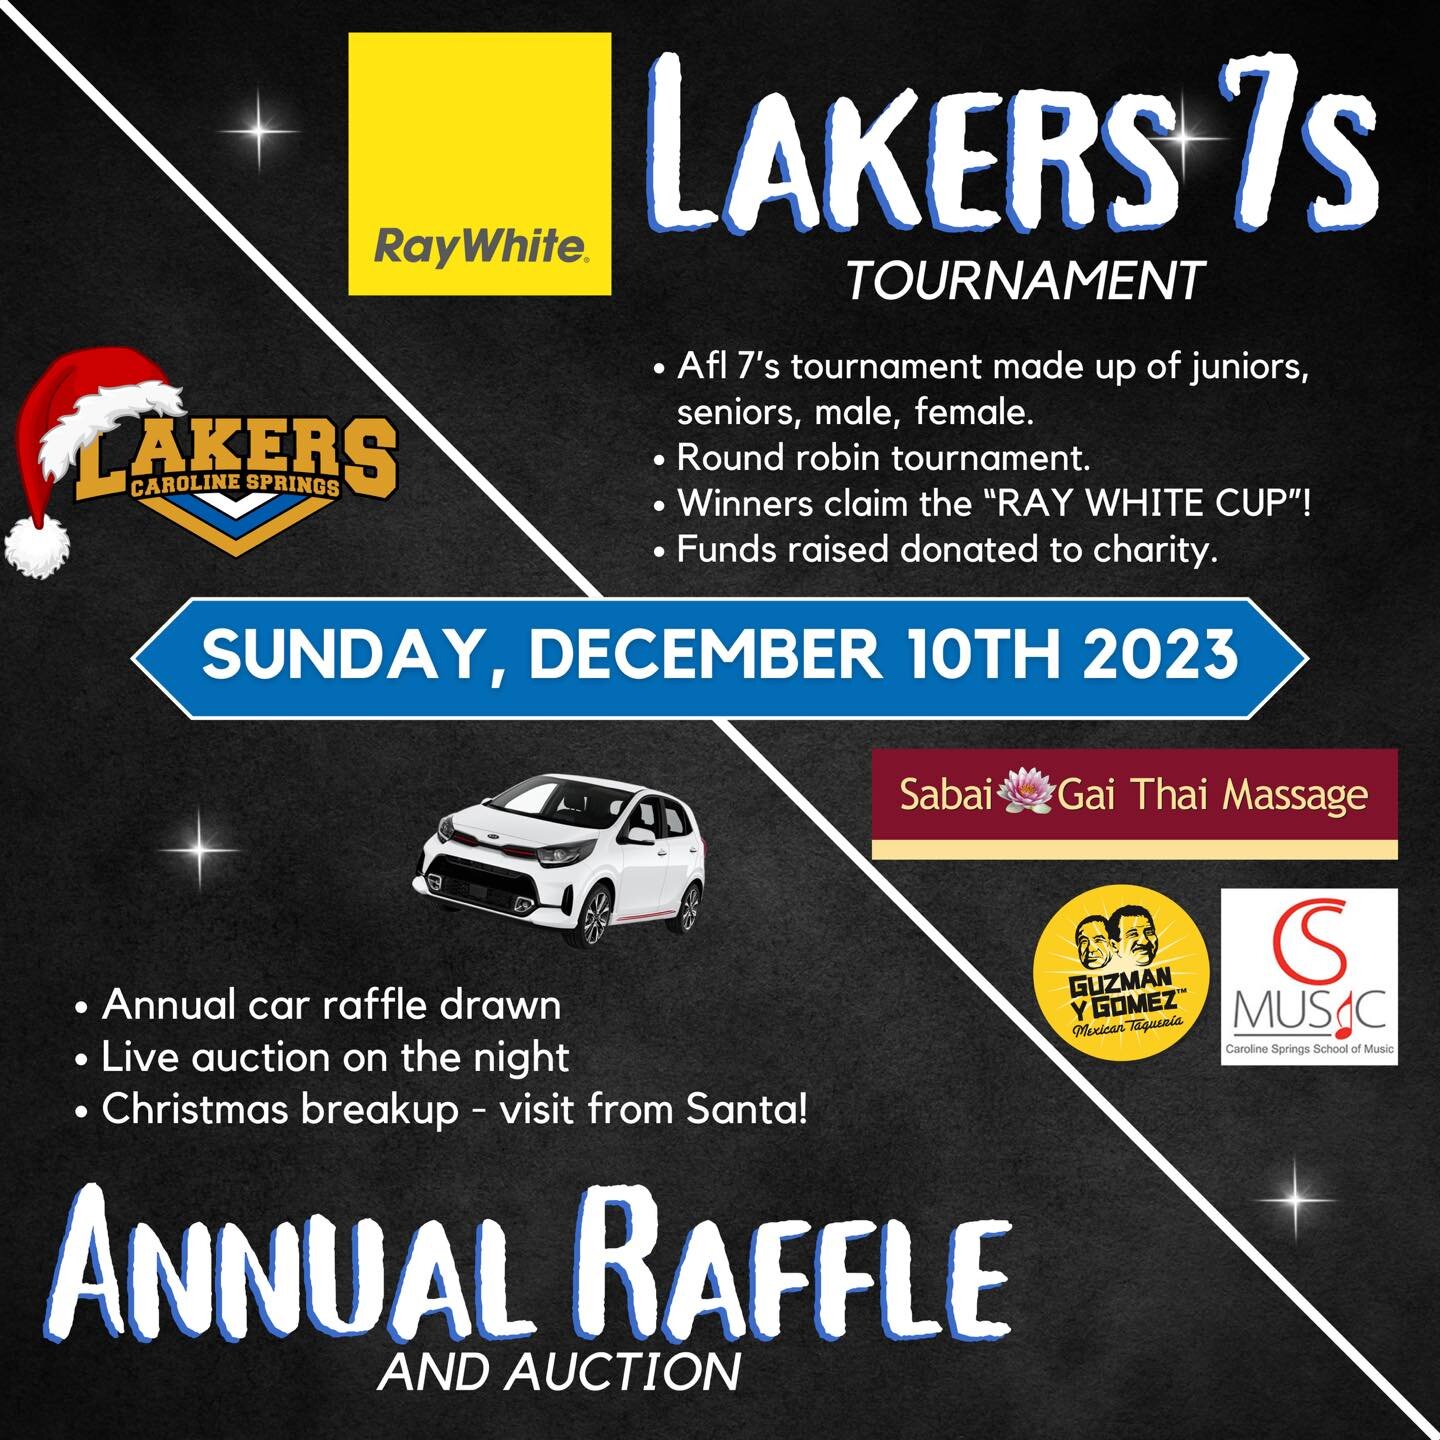 Thanks to our good friends at @raywhitecarolinesprings, we present our inaugural Lakers 7s Tournament and Annual Raffle/Auction night for 2024!

Both events will take place on Sunday, December 10th 2023, commencing with the Lakers 7s Tournament at 1p